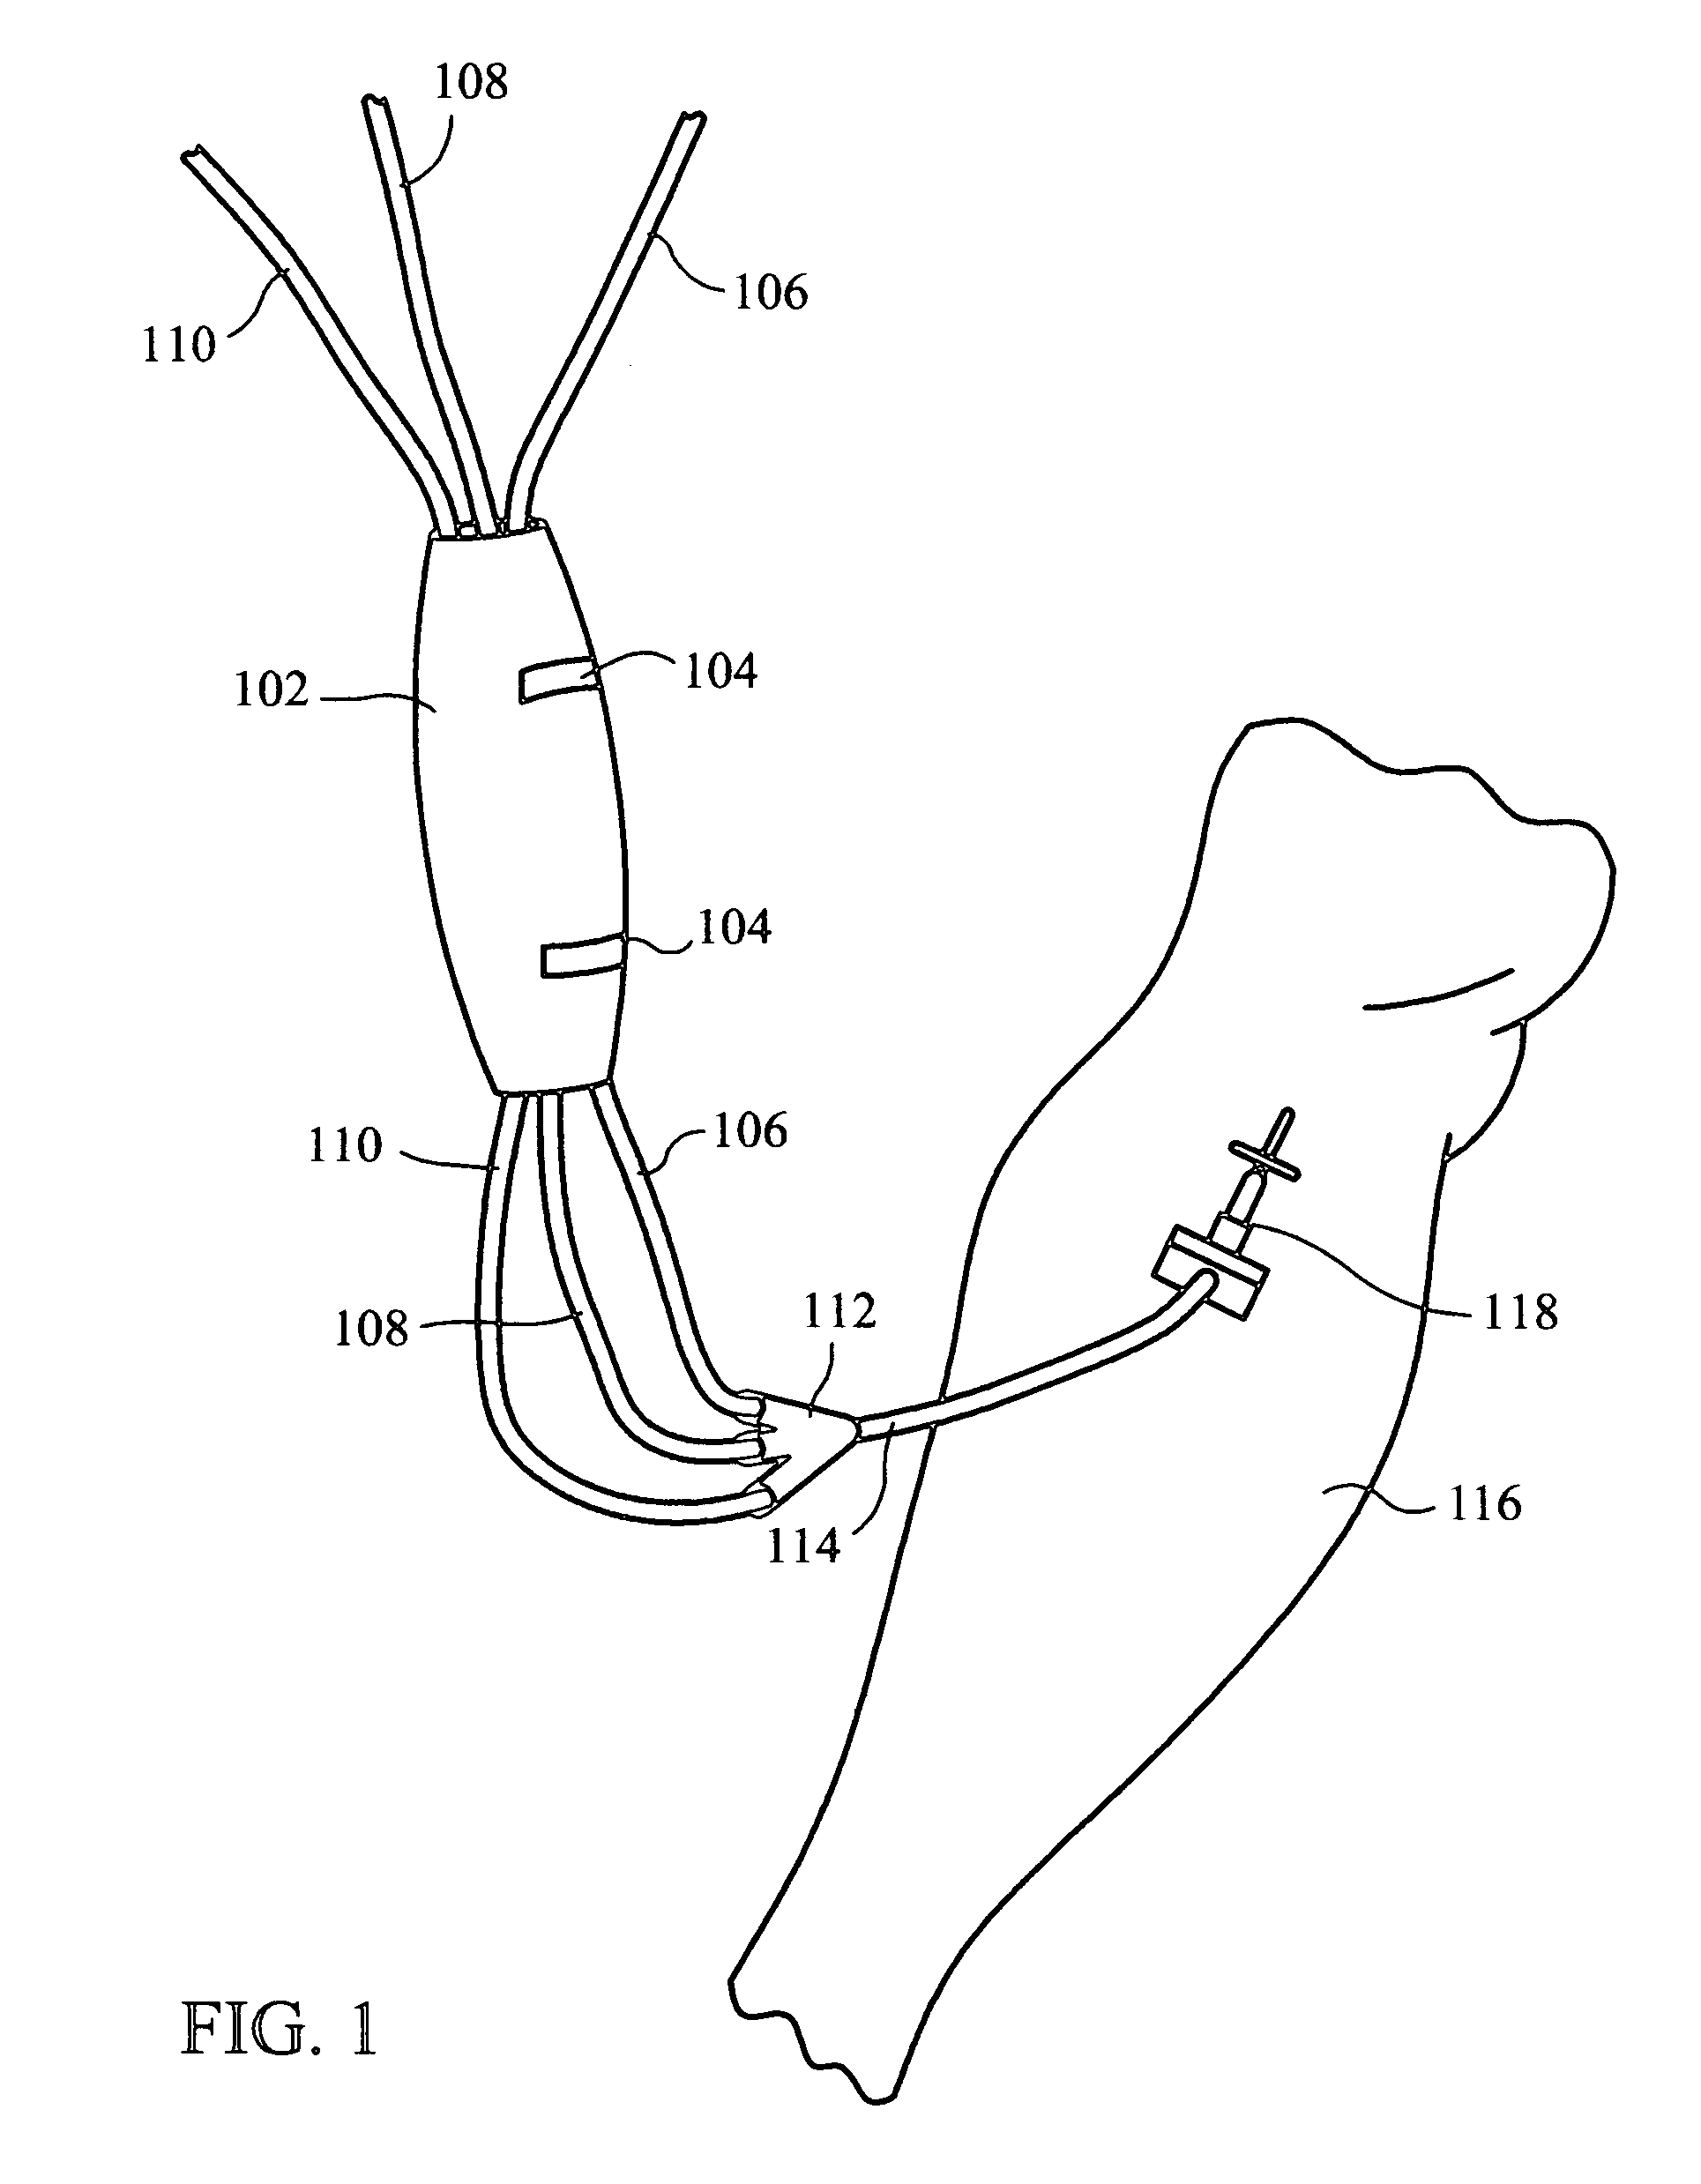 Intravenous tubing protector and support system